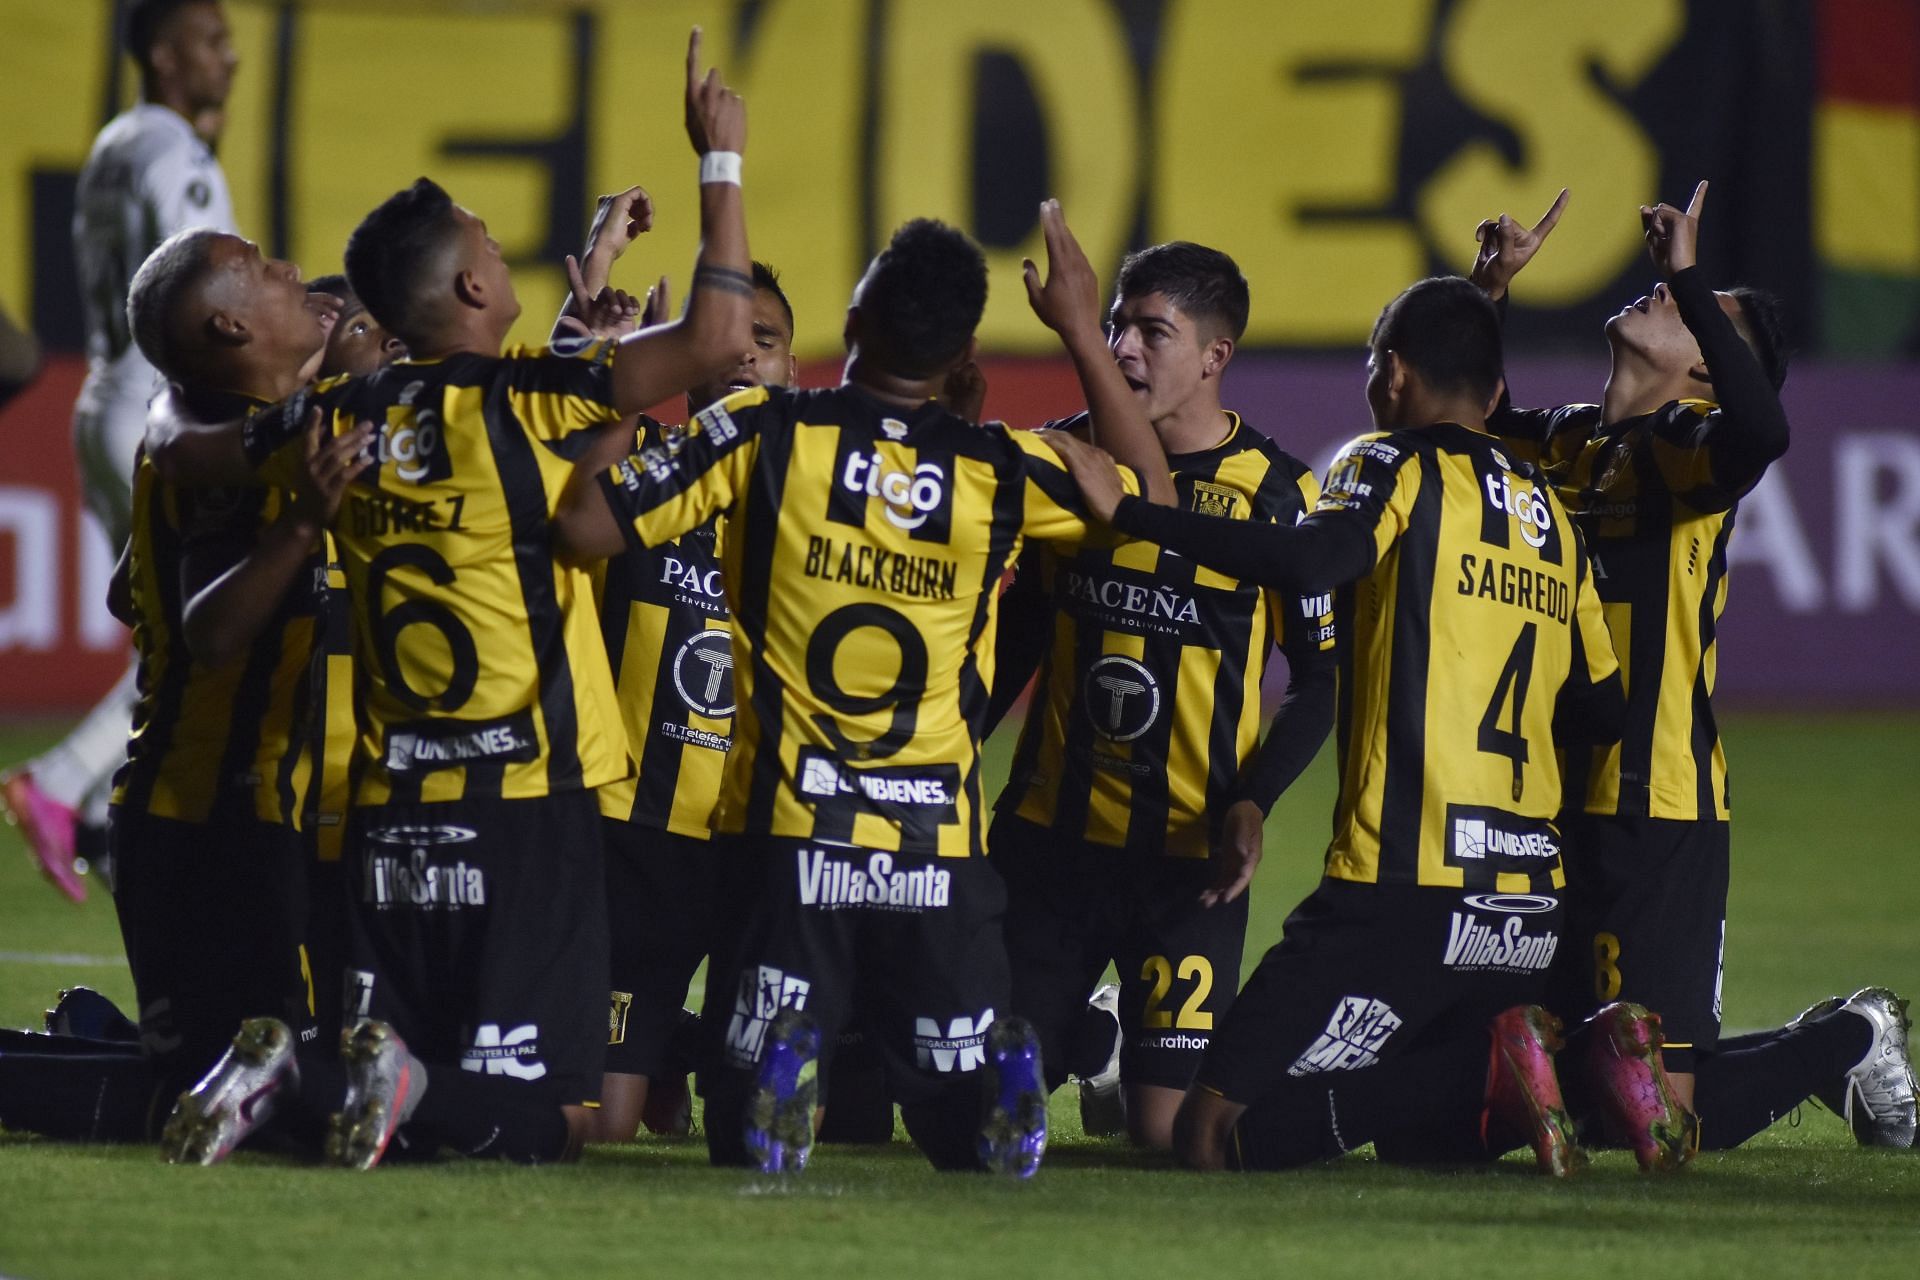 The Strongest will face Universidad Catolica on Wednesday